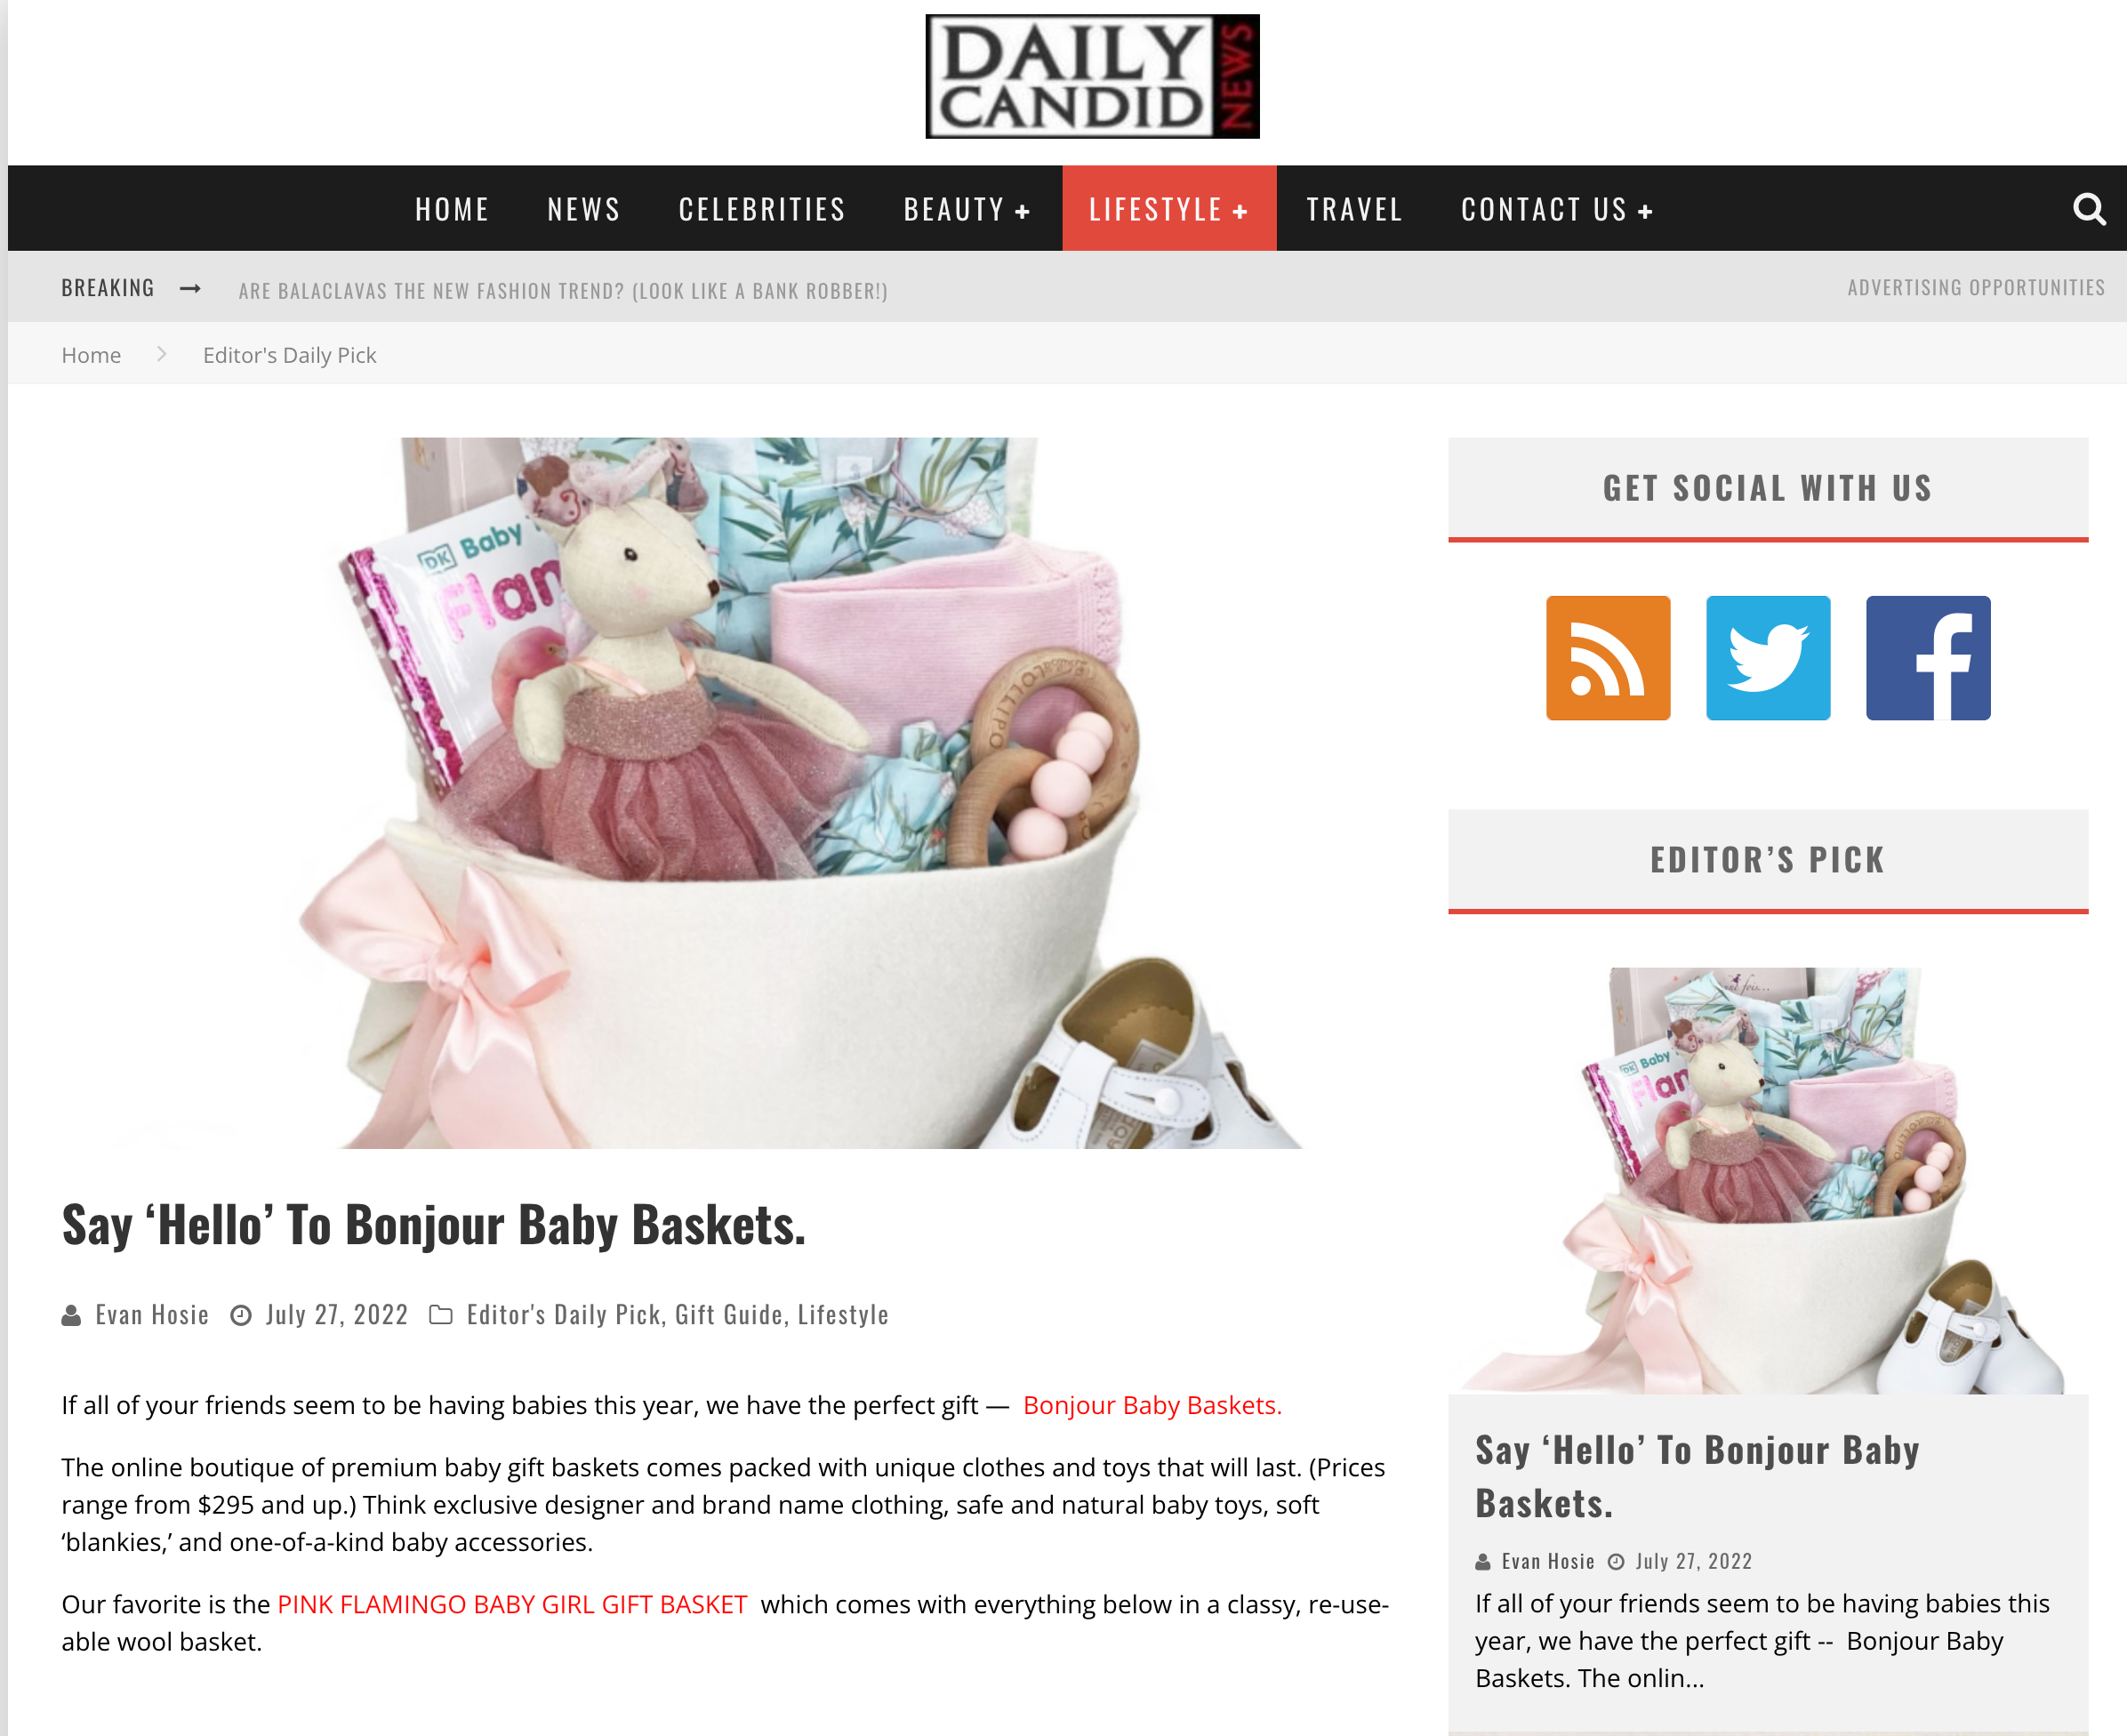 Say Hello to Bonjour Baby Baskets by Daily Candid News